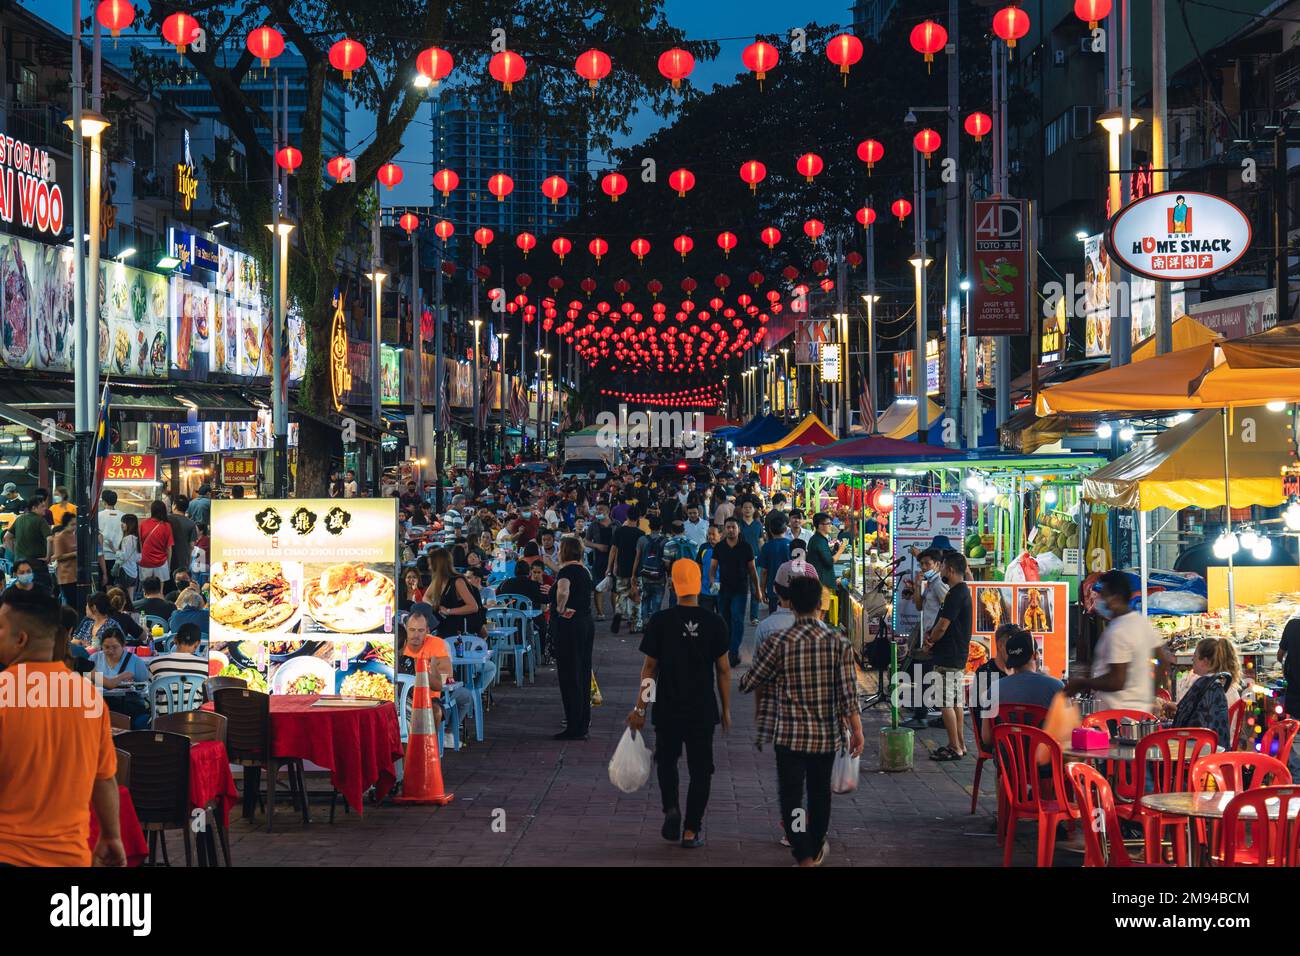 January 10, 2023: Jalan Alor food street in kuala lumpur, malaysia, was once known as a red light district and remnants of those activities still exis Stock Photo